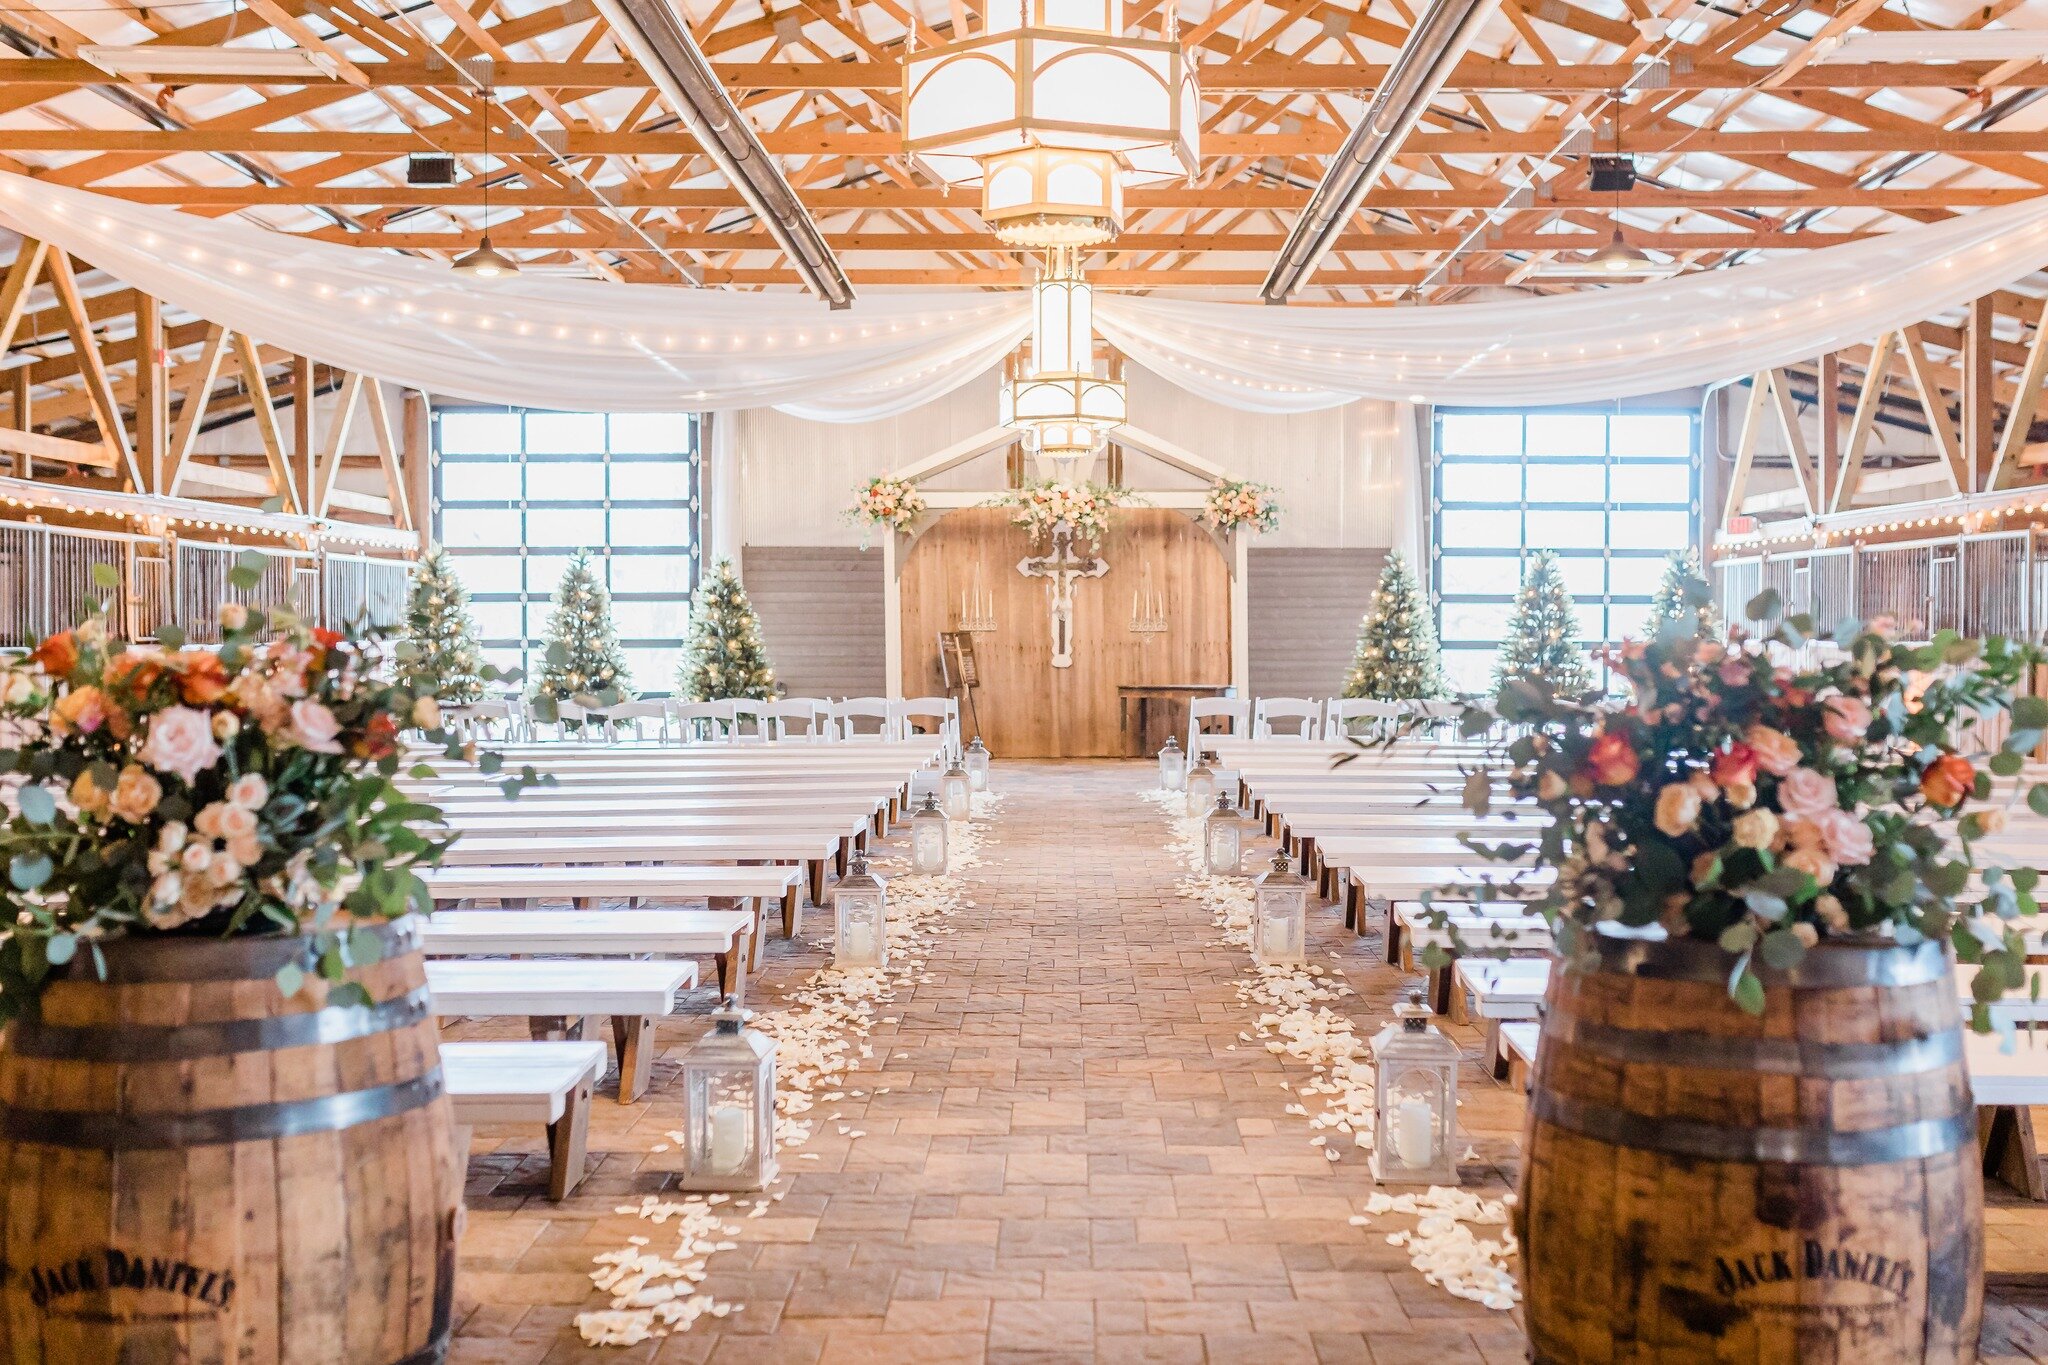 Your wedding day is a celebration of love, and at Highland Stables, we believe that it should be stress-free and effortless. That's why we offer the convenience of hosting your wedding and reception under one roof. Our stunning event space can accomm